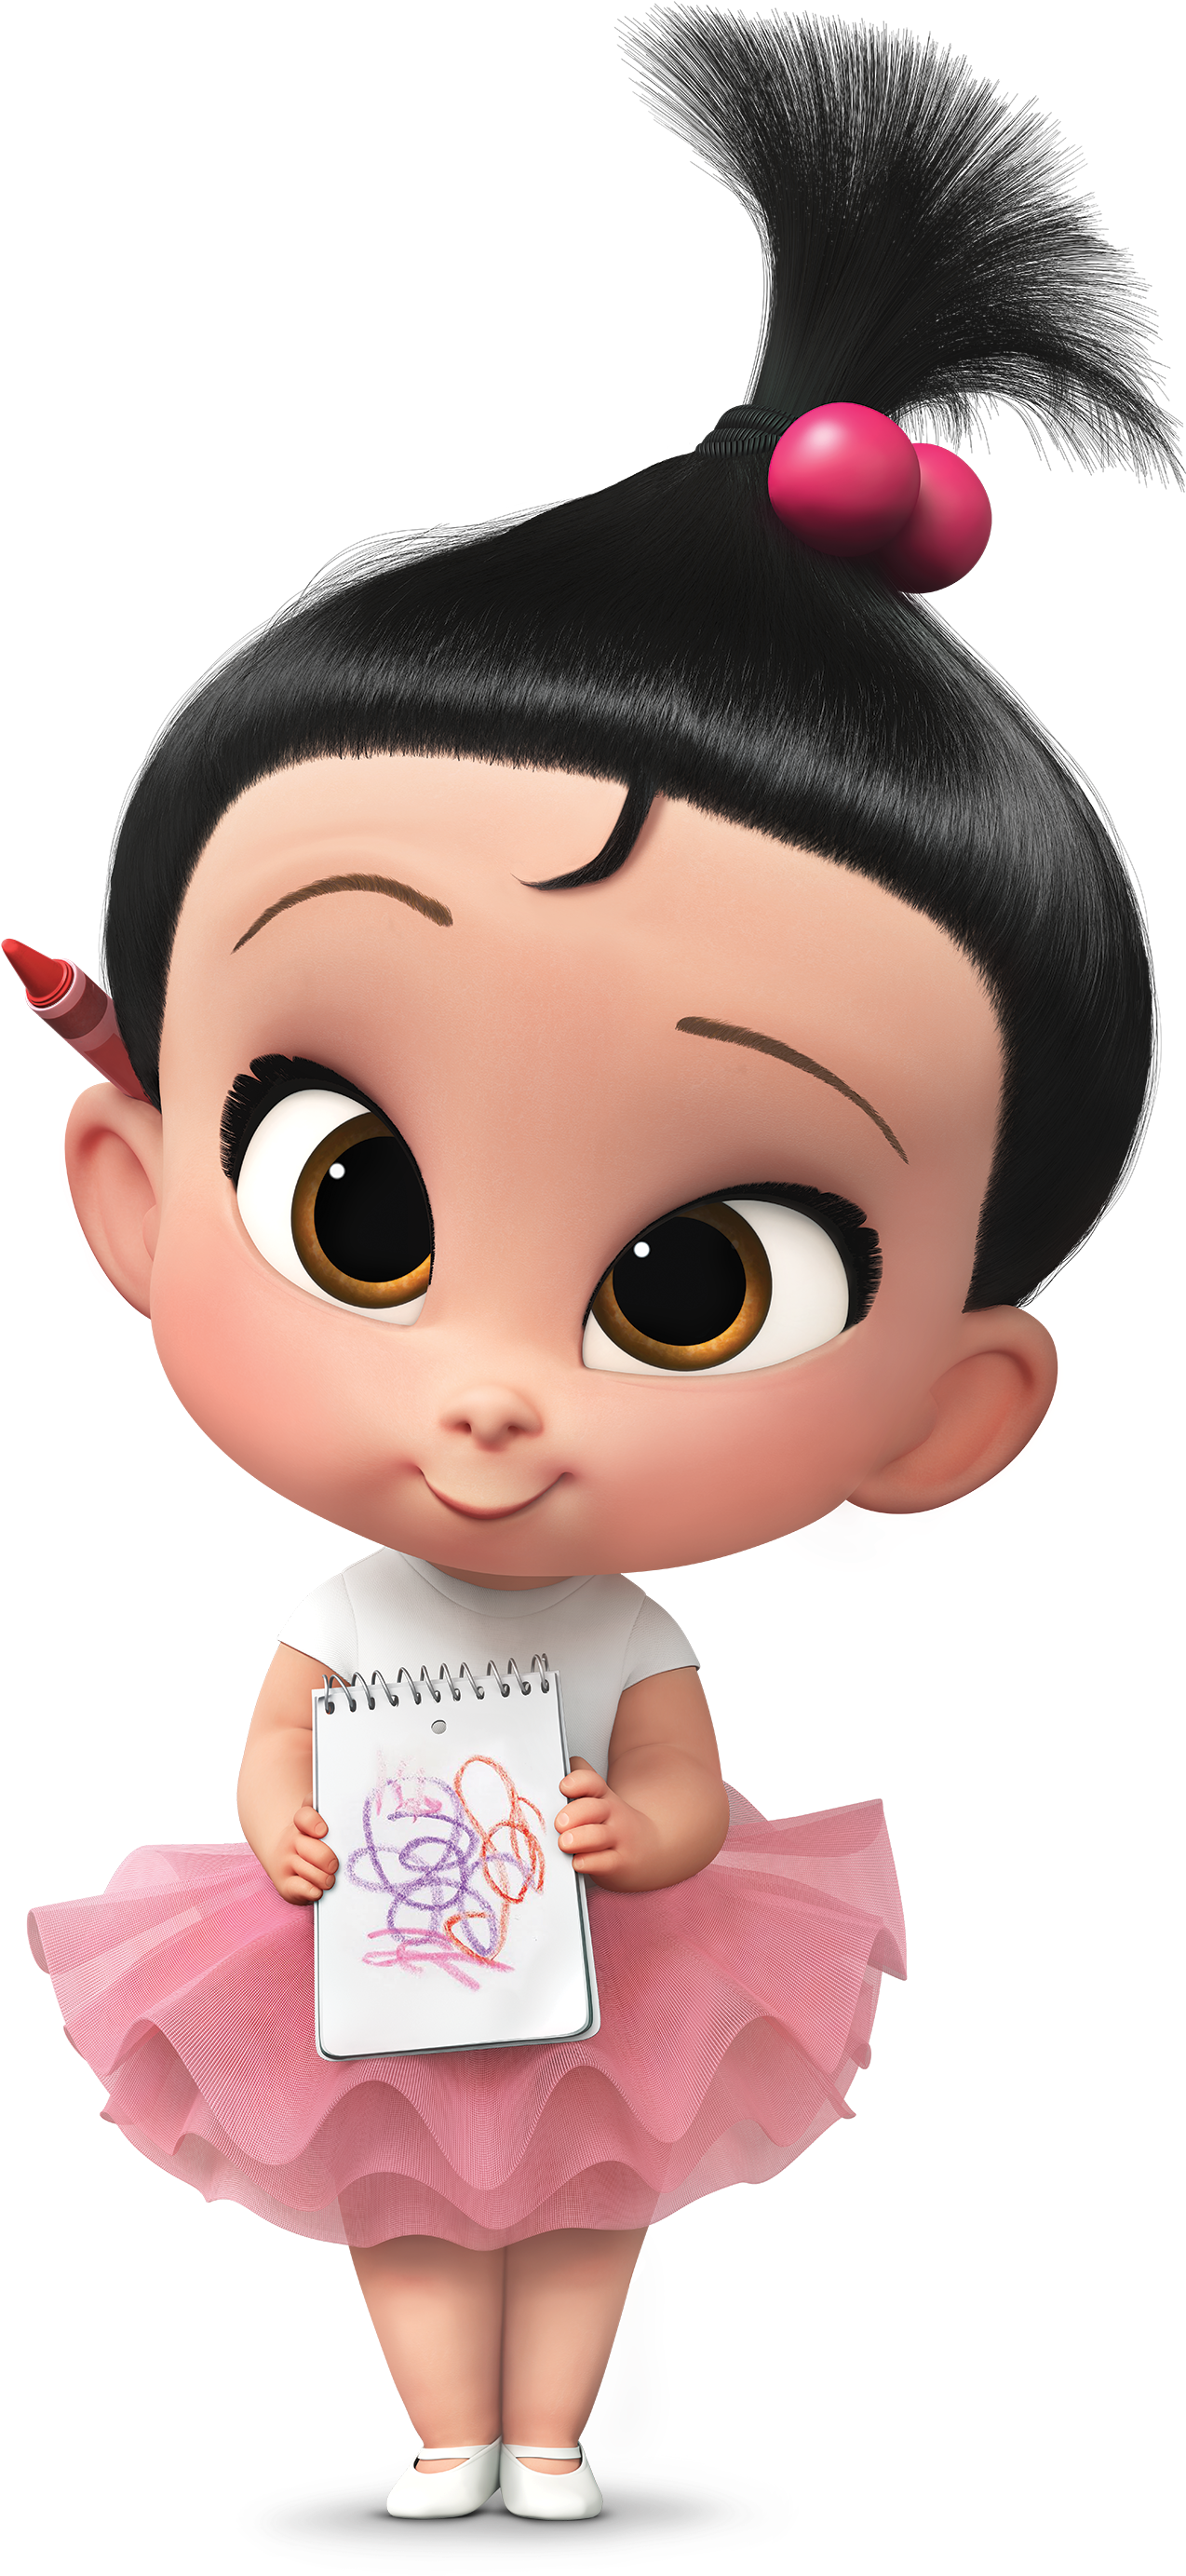 Boss Baby Girlwith Notepad